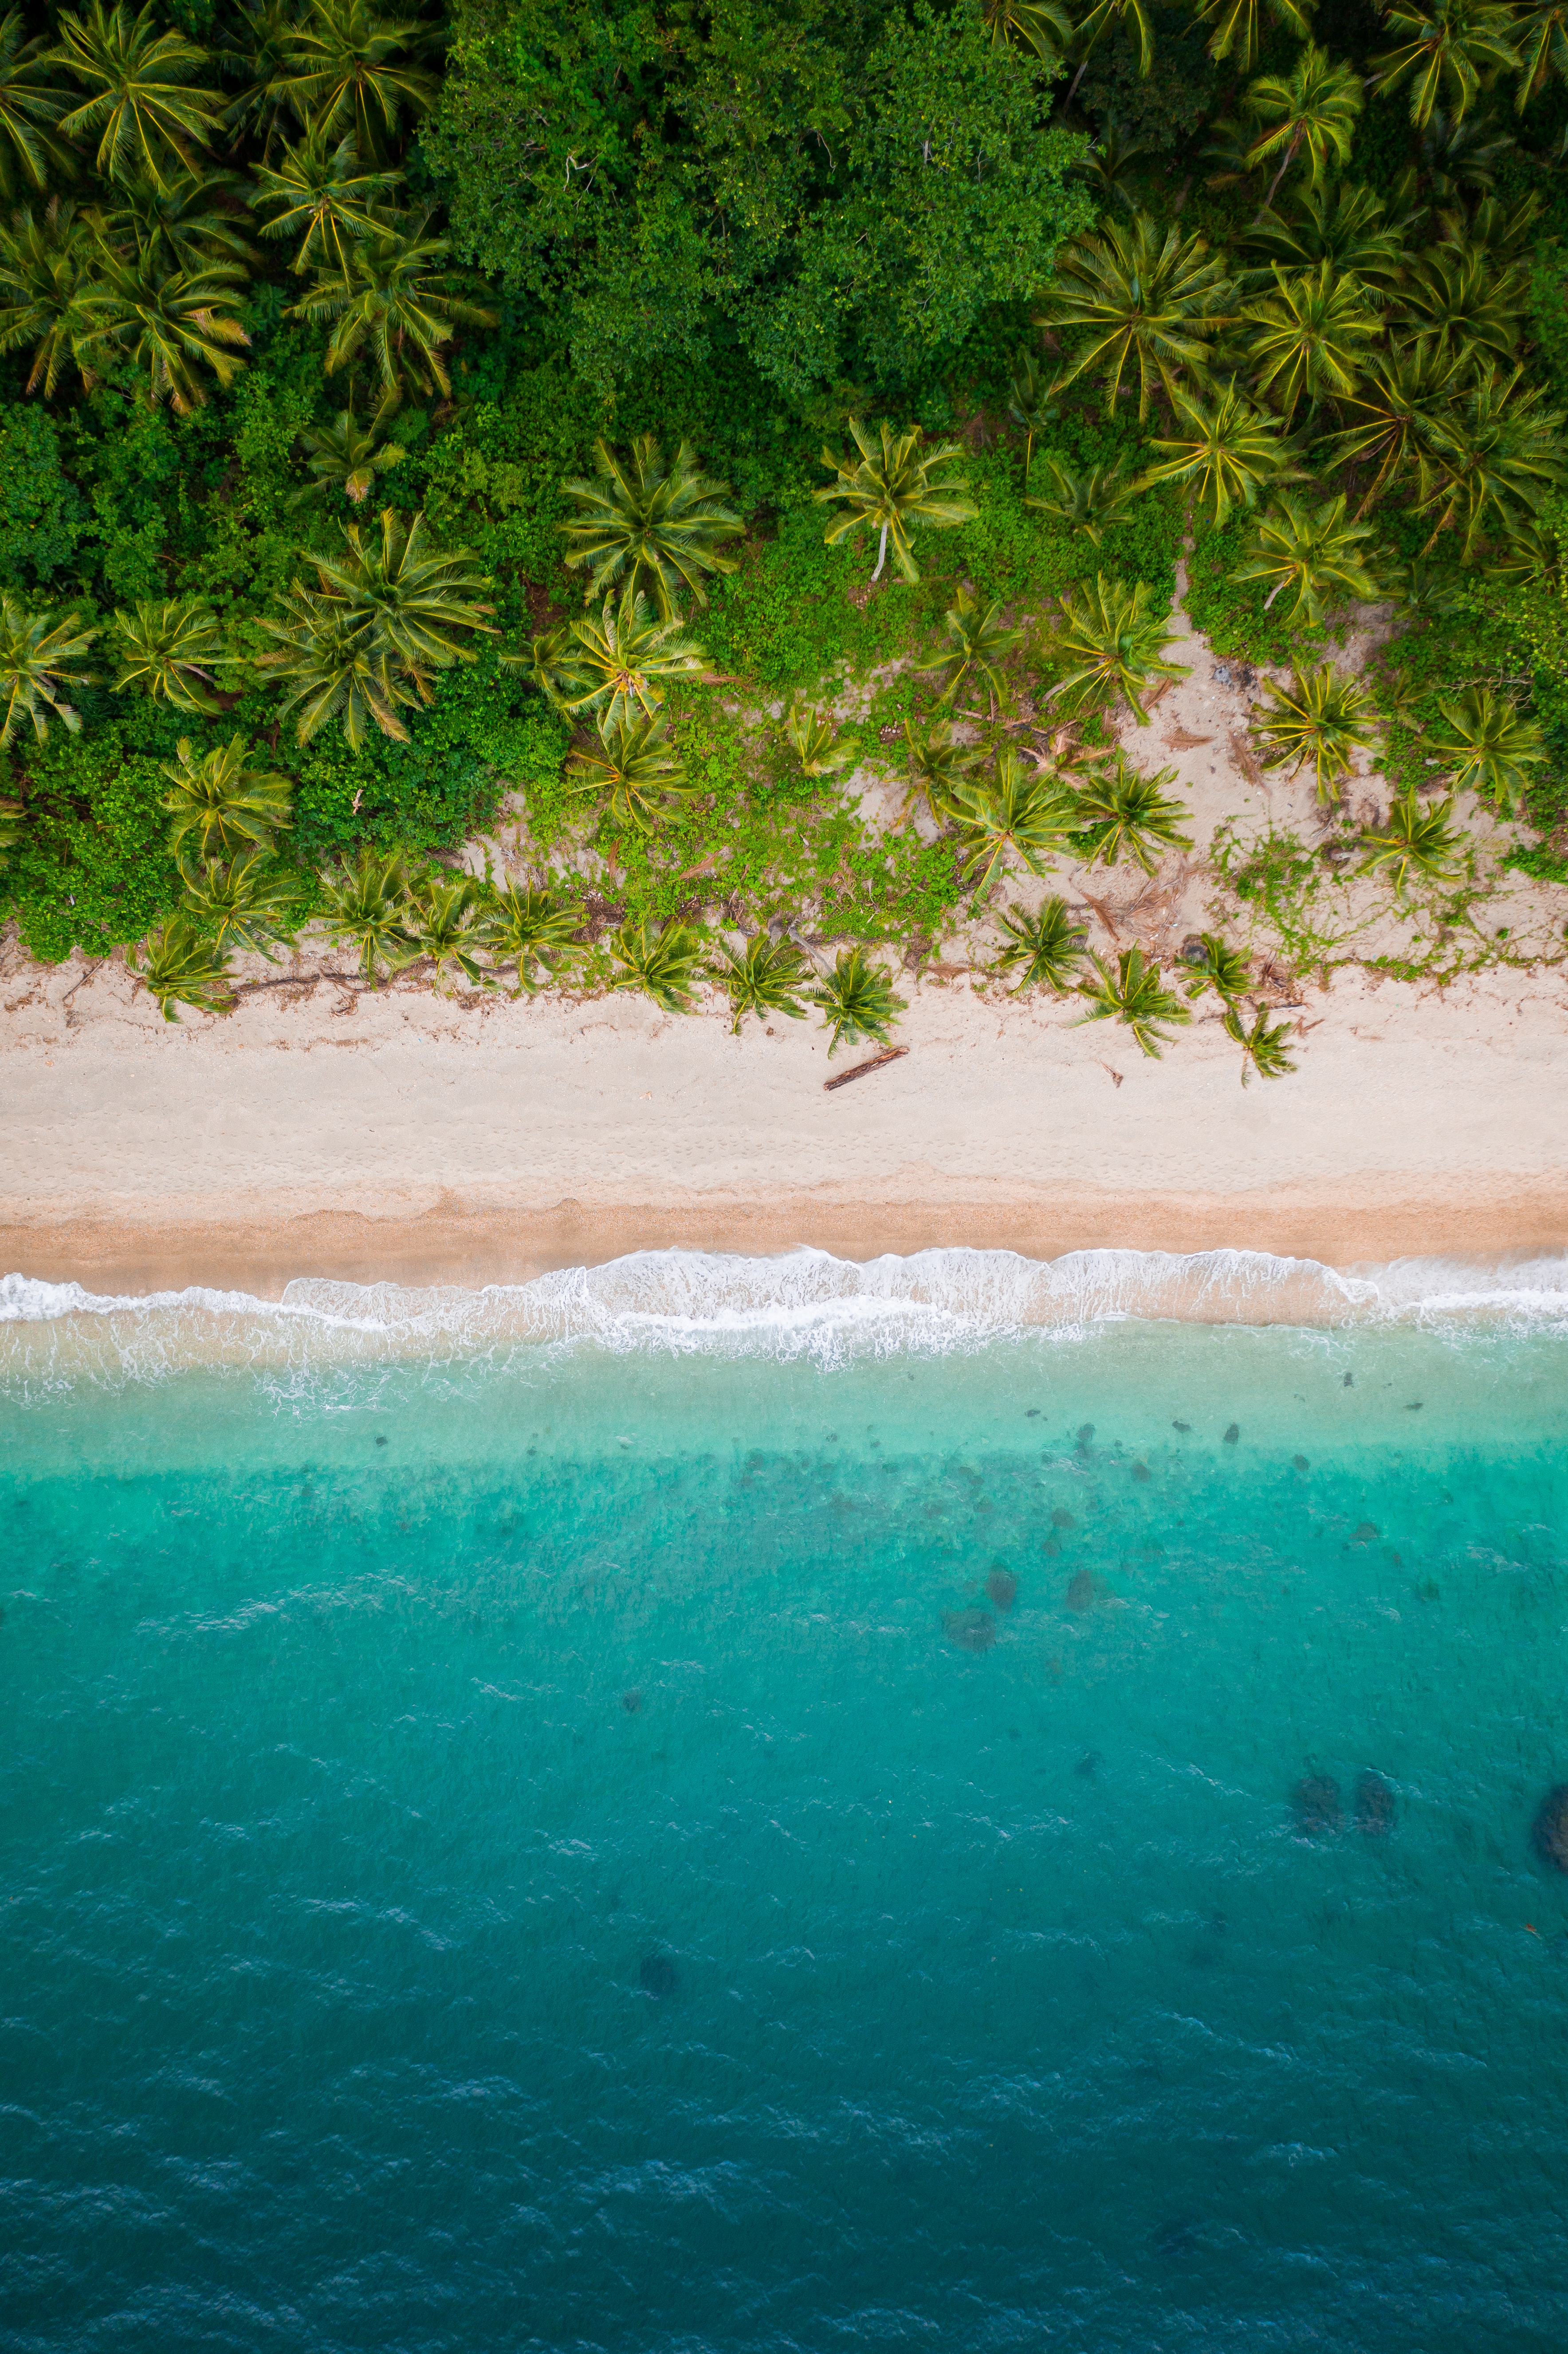 view from above, bank, nature, beach, palms, sand, shore QHD